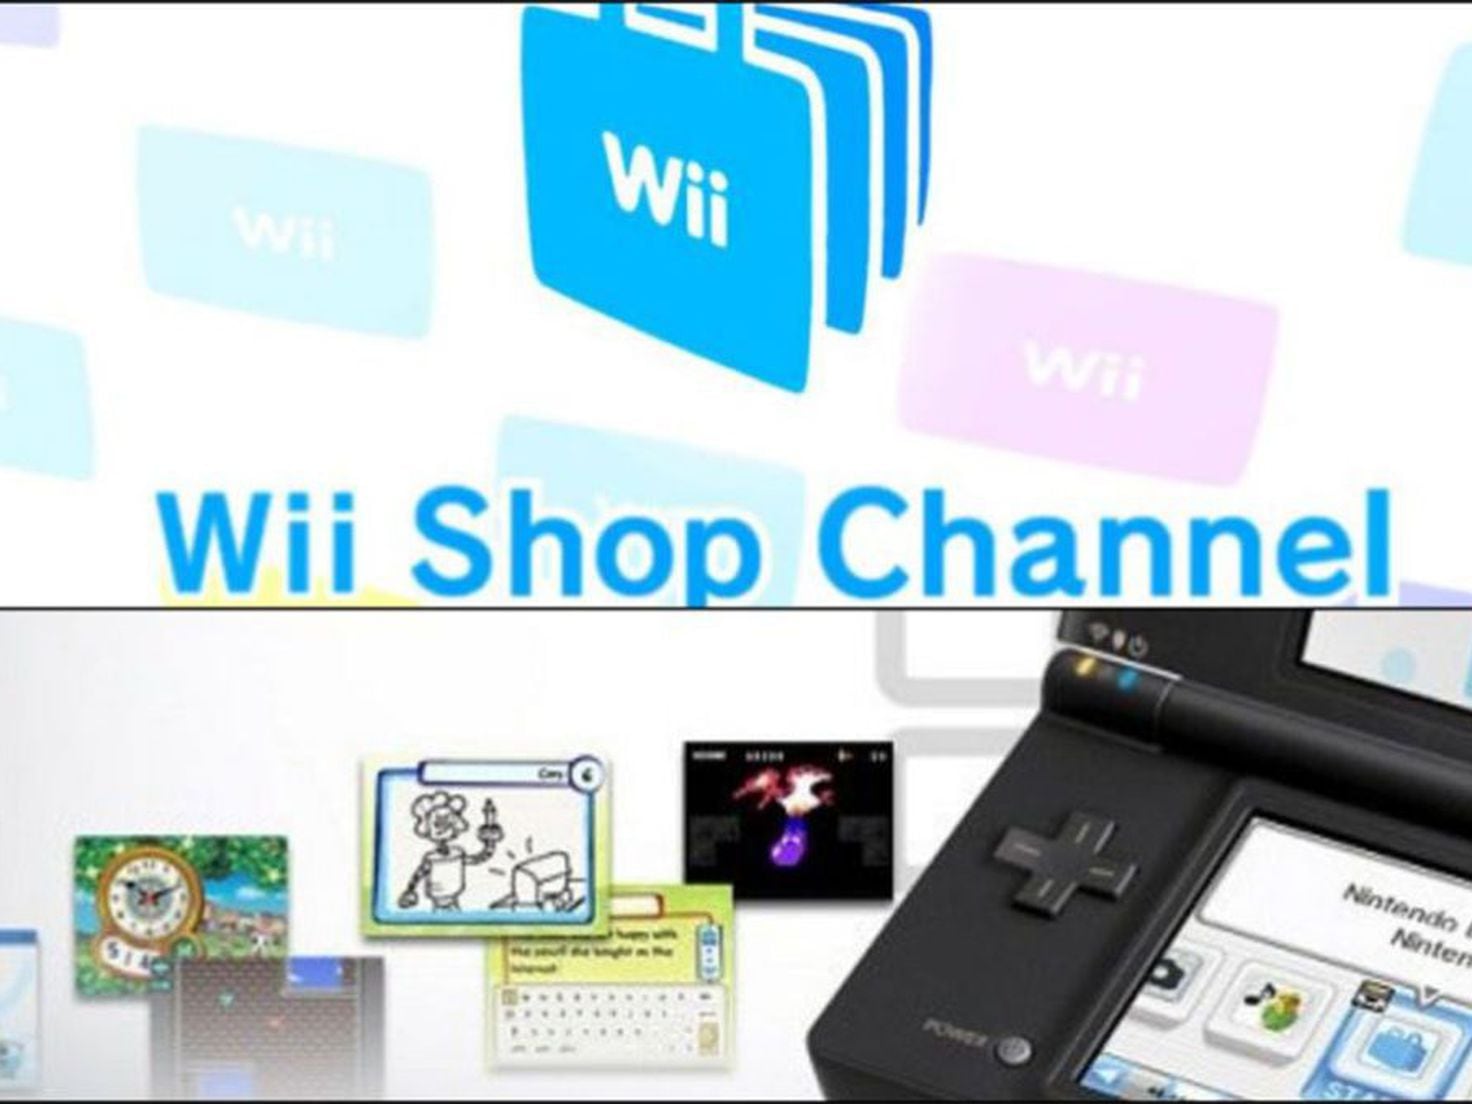 DSi launches in Europe, DSi Store now live